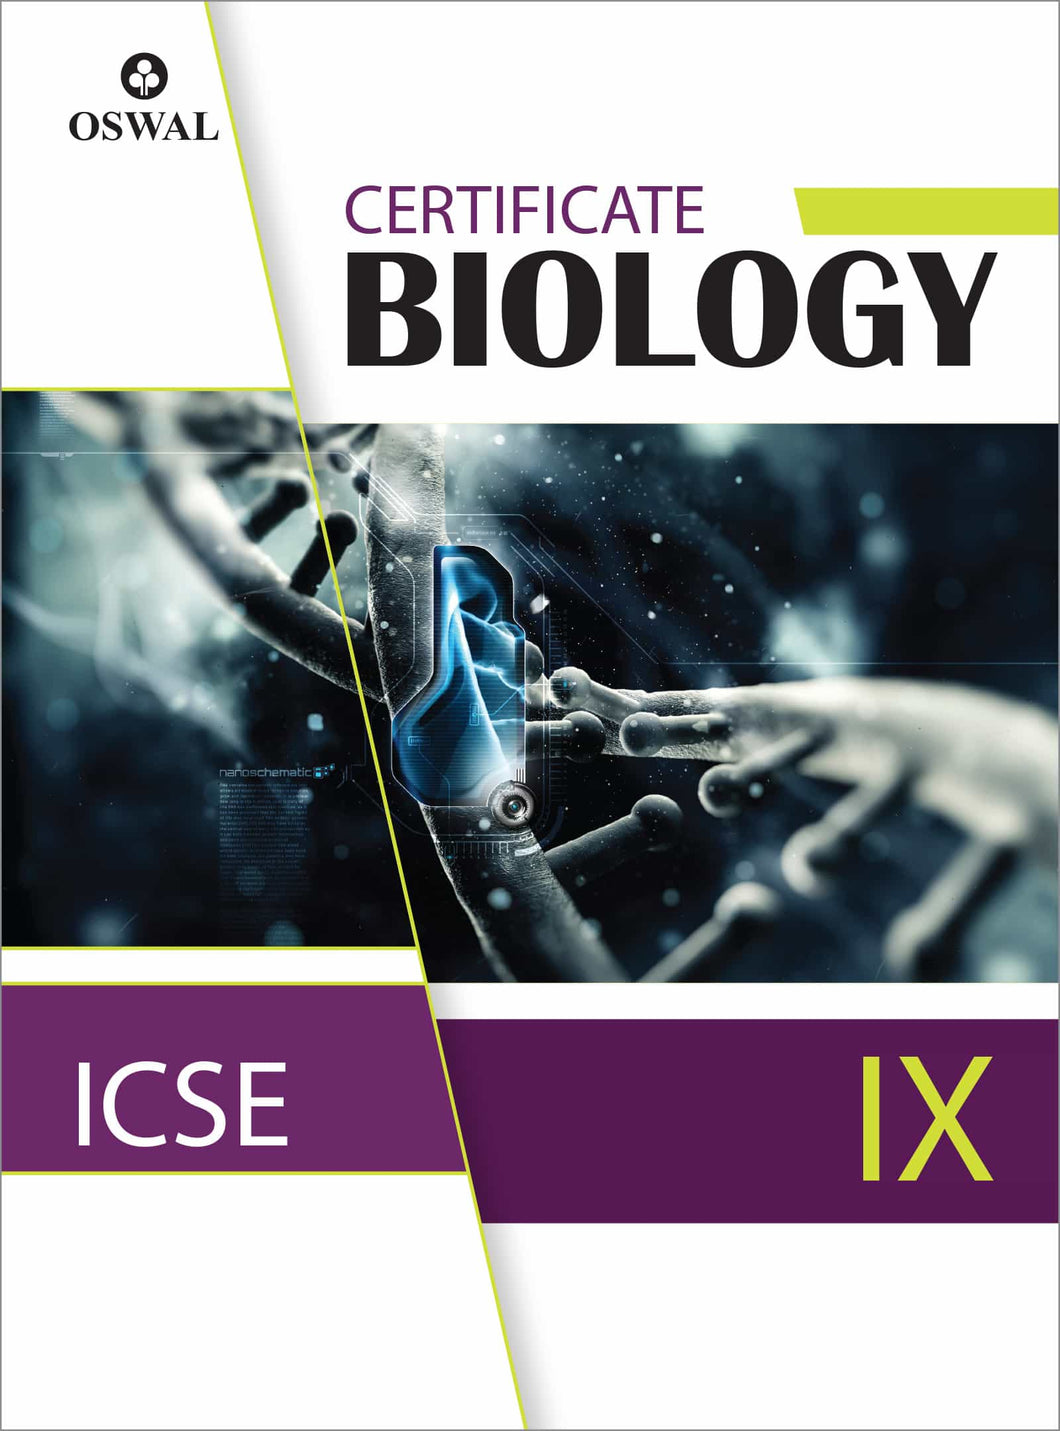 Oswal Certificate Biology